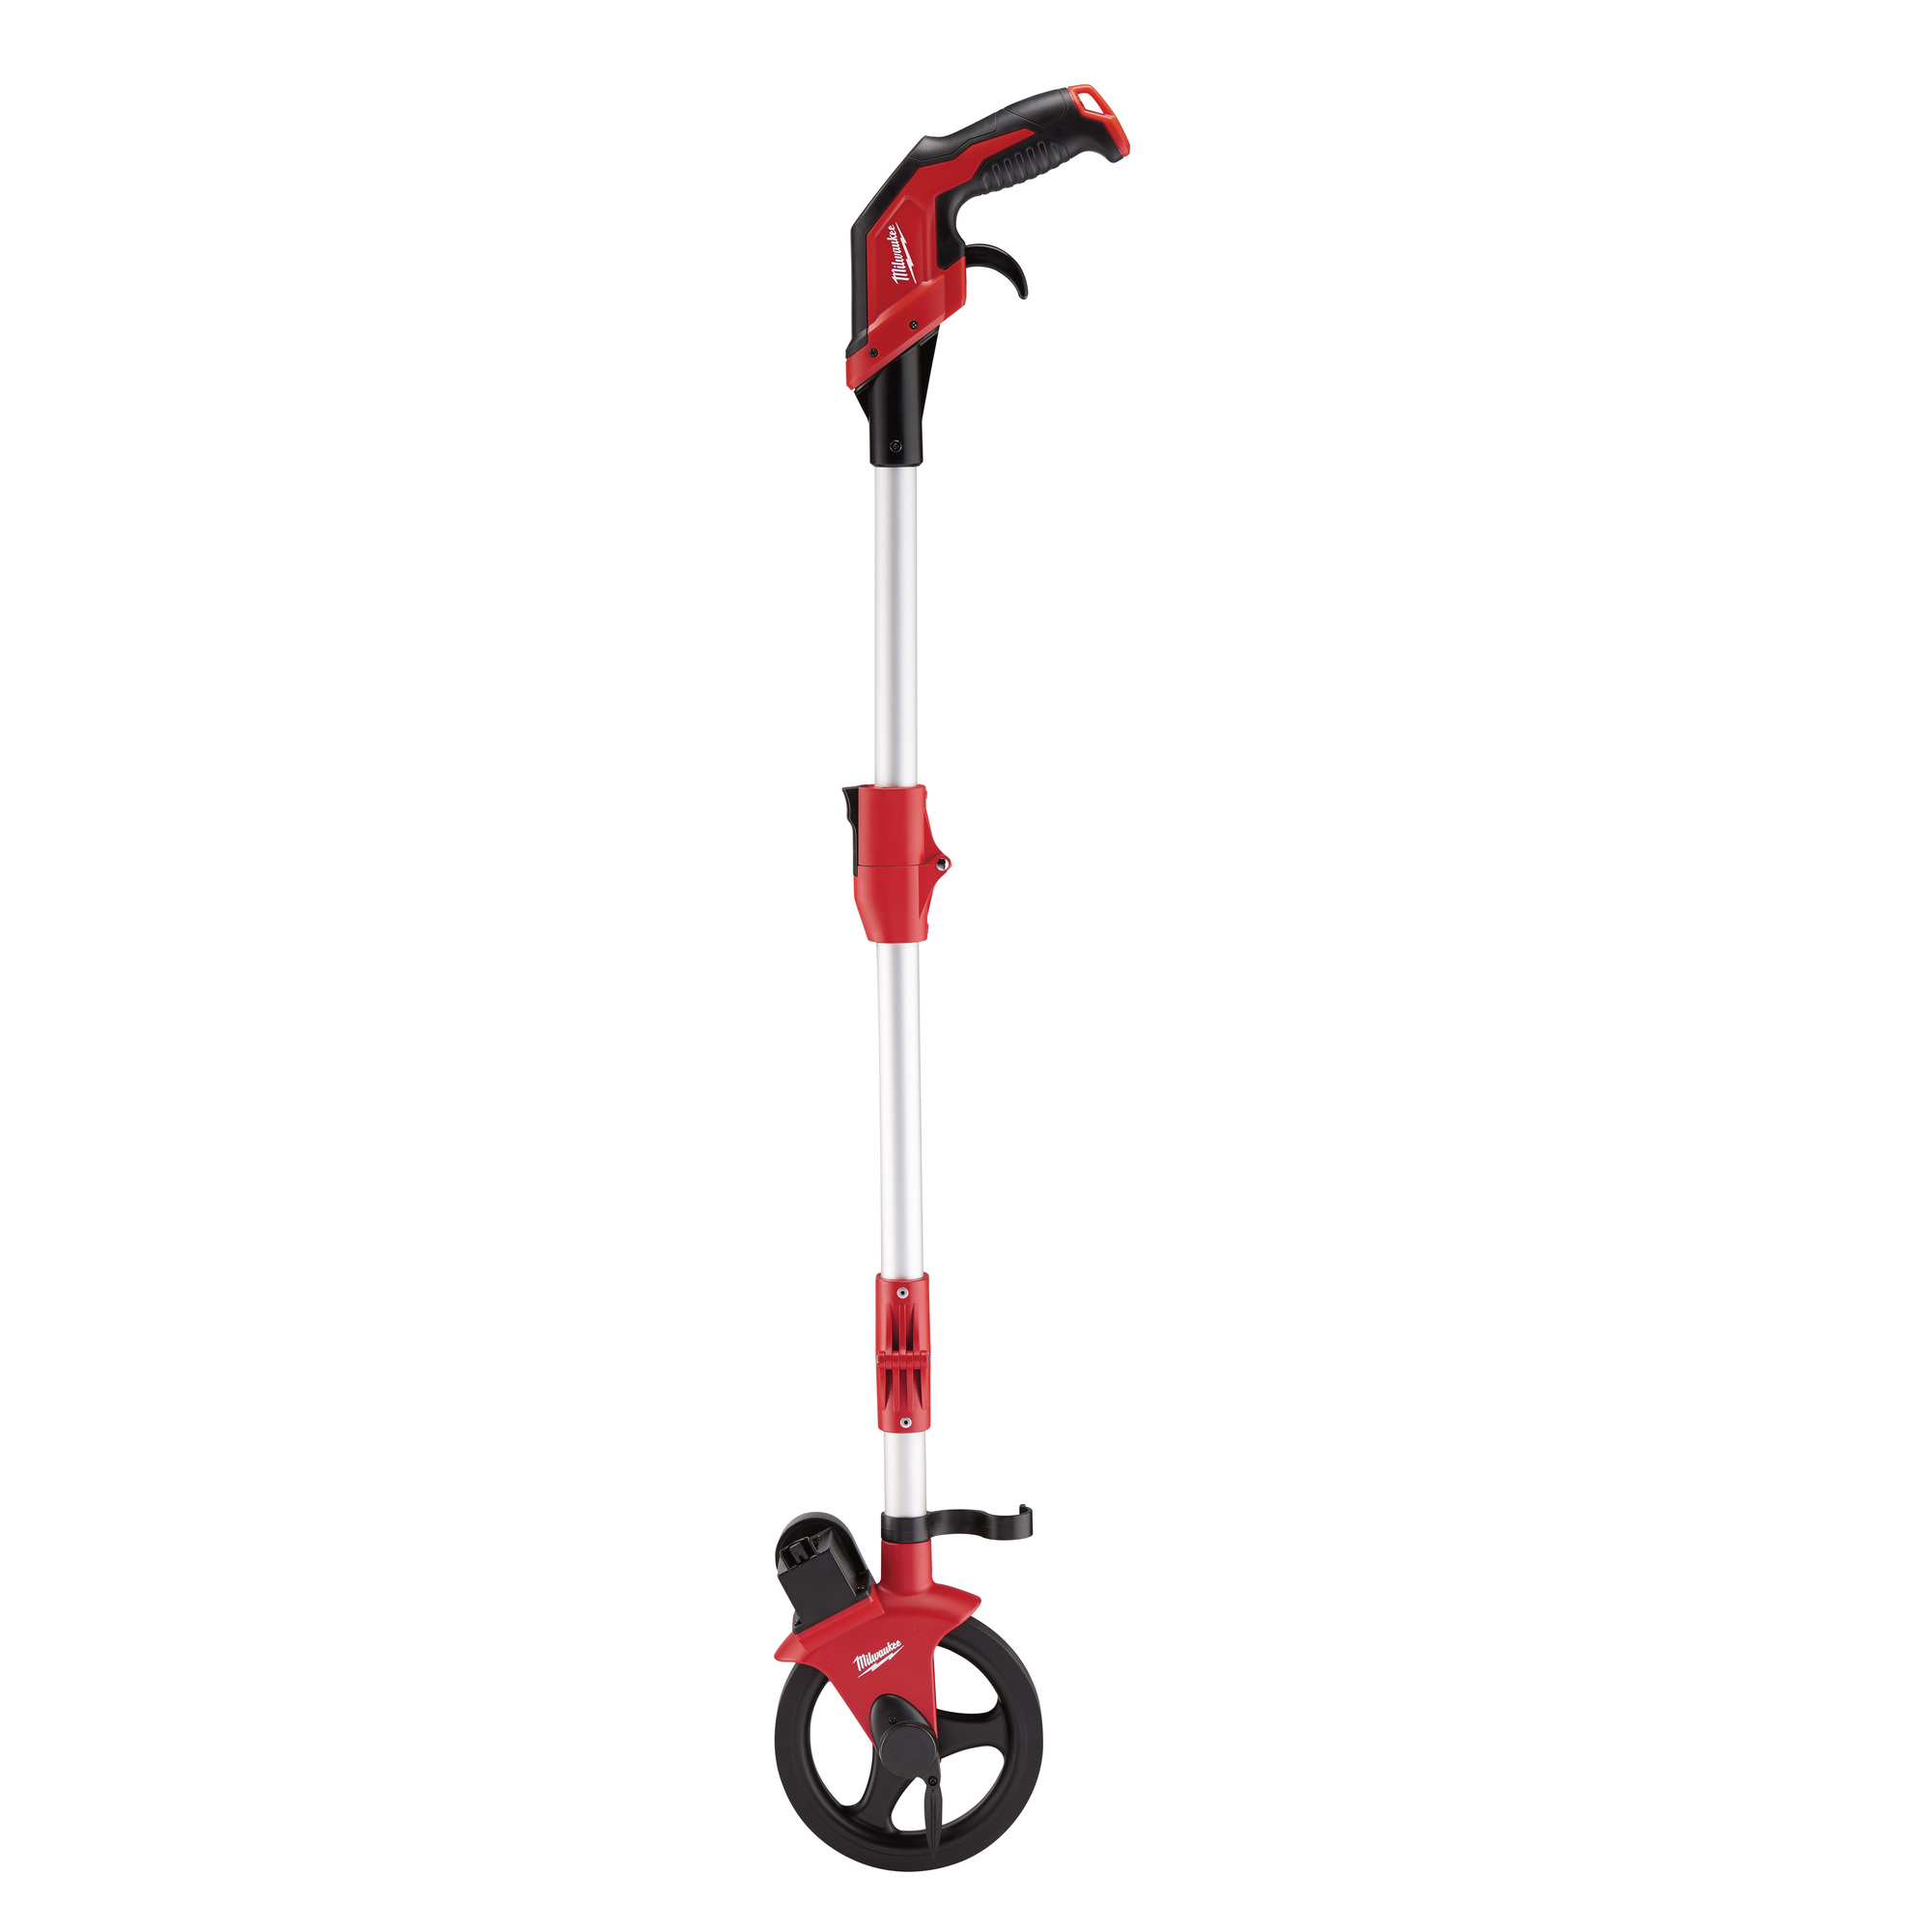 Milwaukee, 6Inch Measuring Wheel, Length 6 ft, Wheel Circumference 6 ft, Measures Up To 10000 ft, Model 48-22-5006